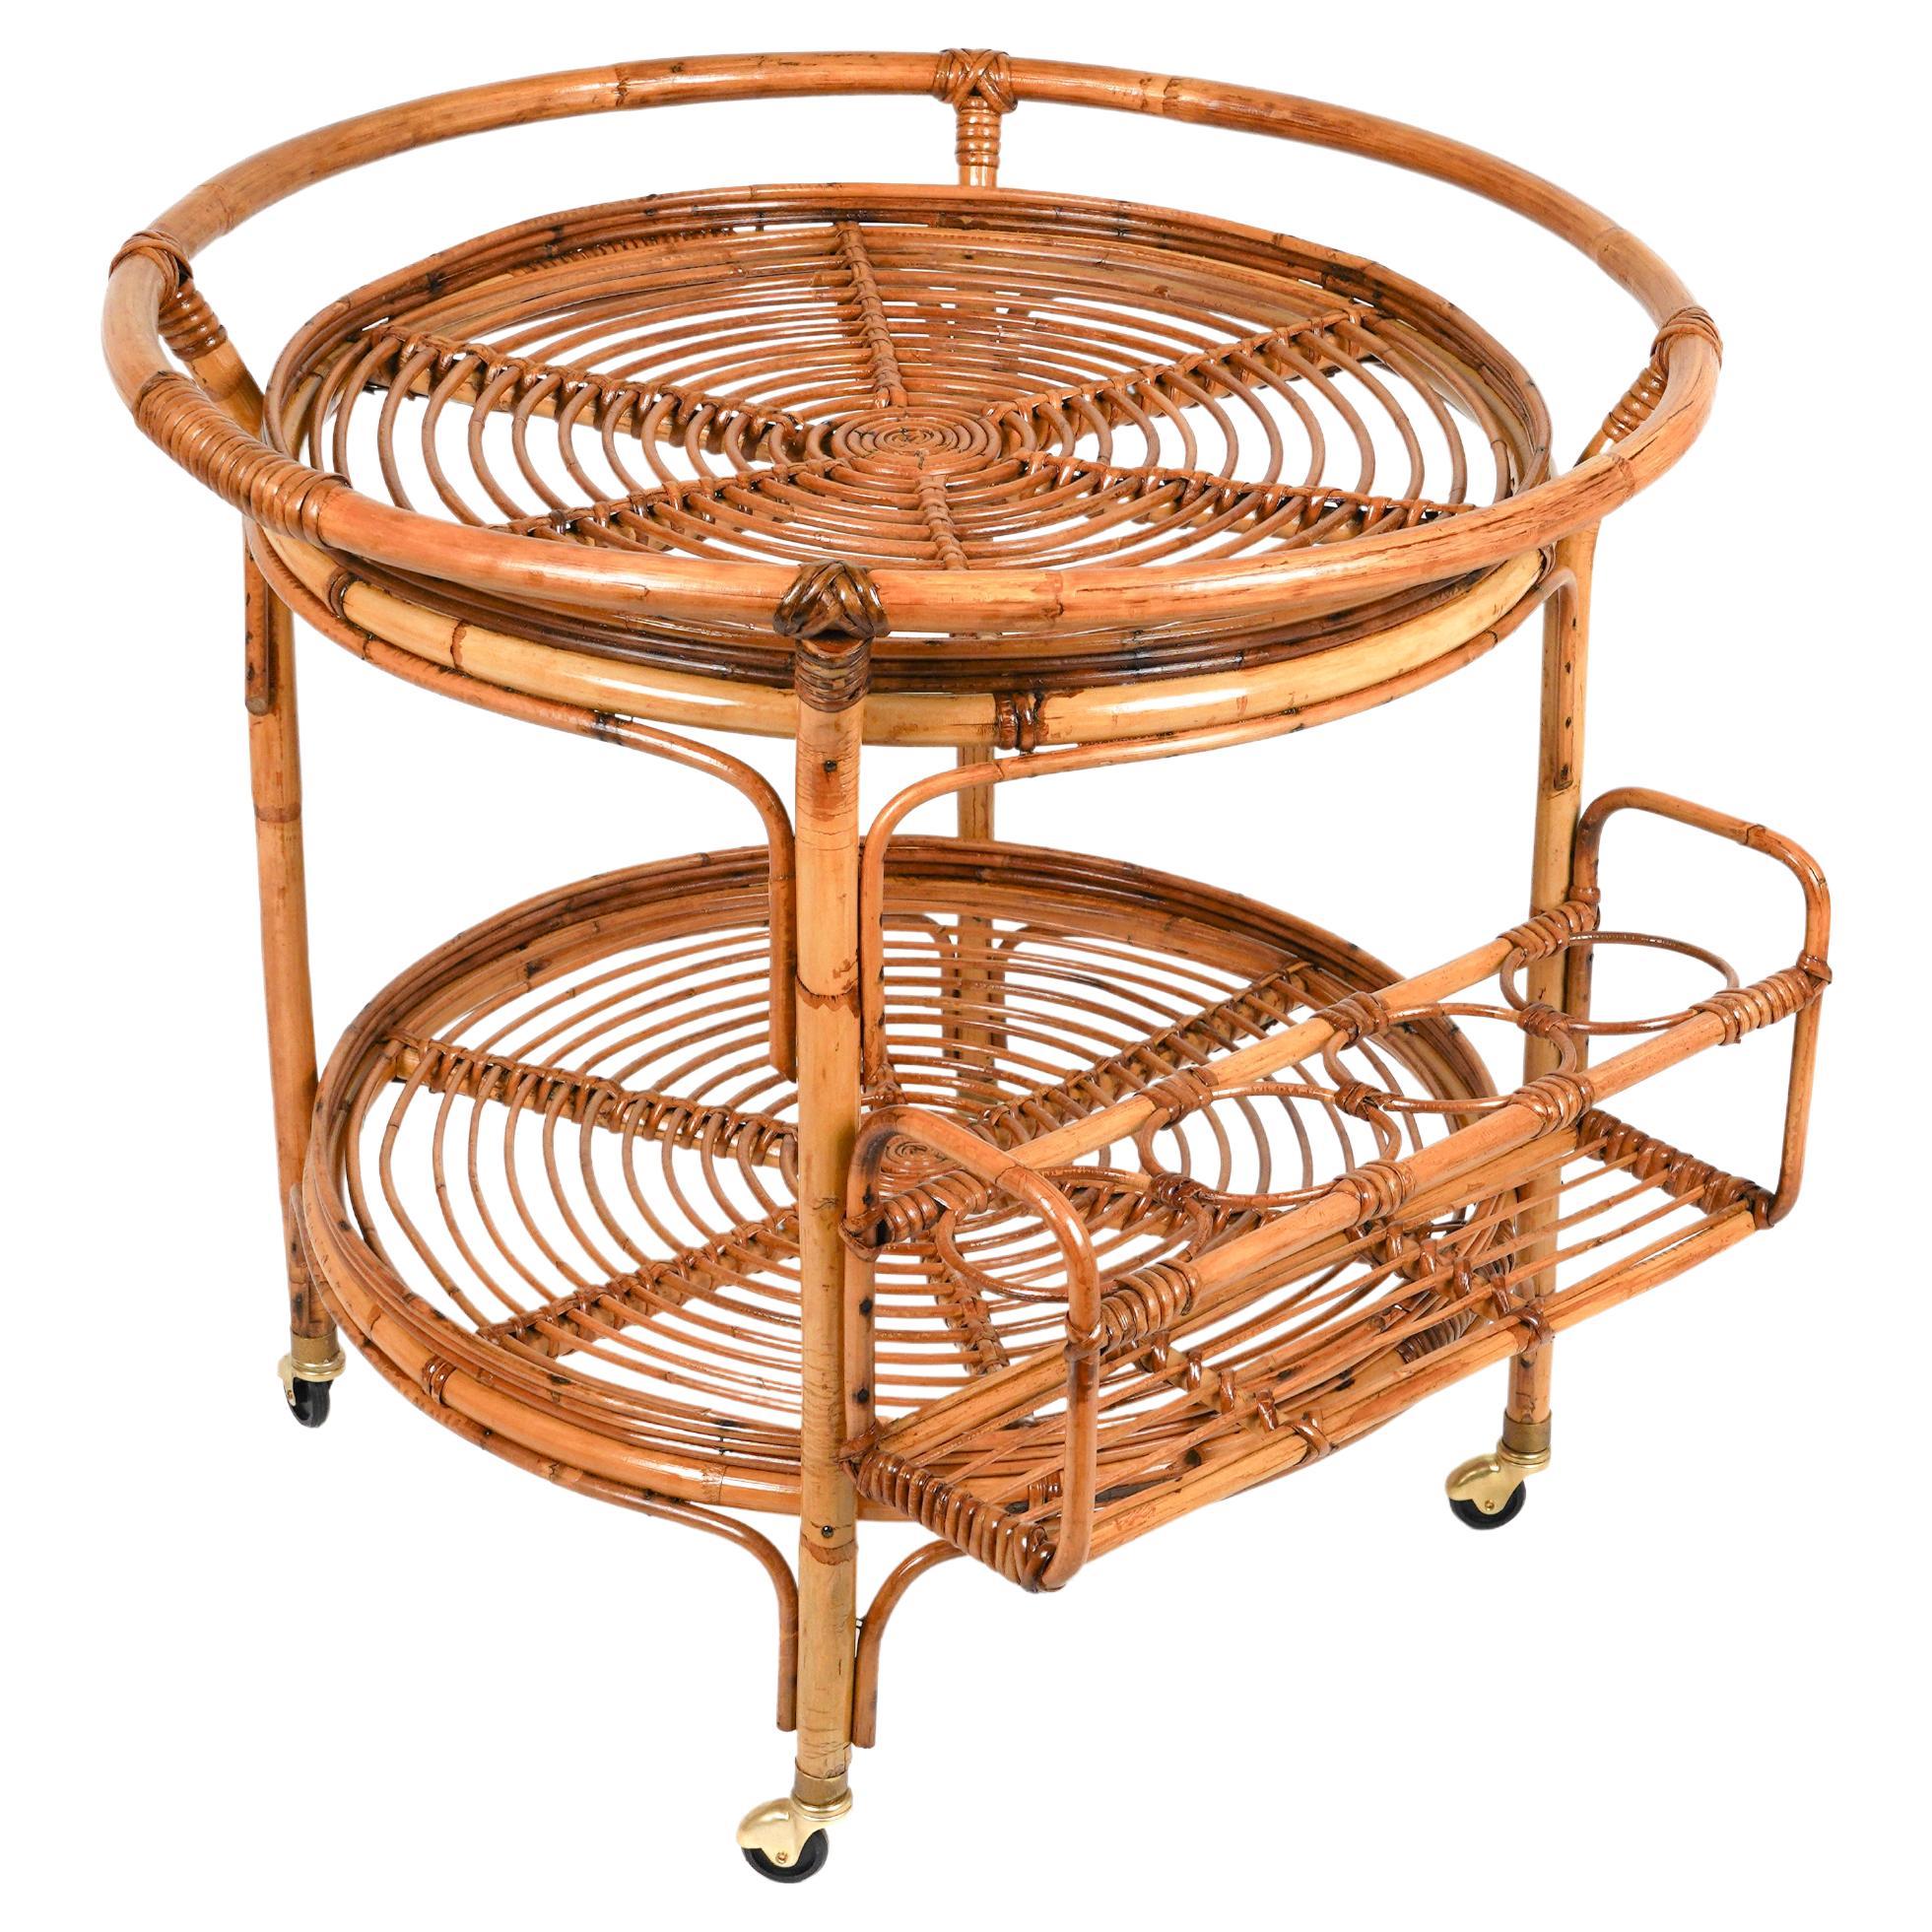 Midcentury Rattan and Bamboo Round Serving Bar Cart Trolley, Italy 1960s For Sale